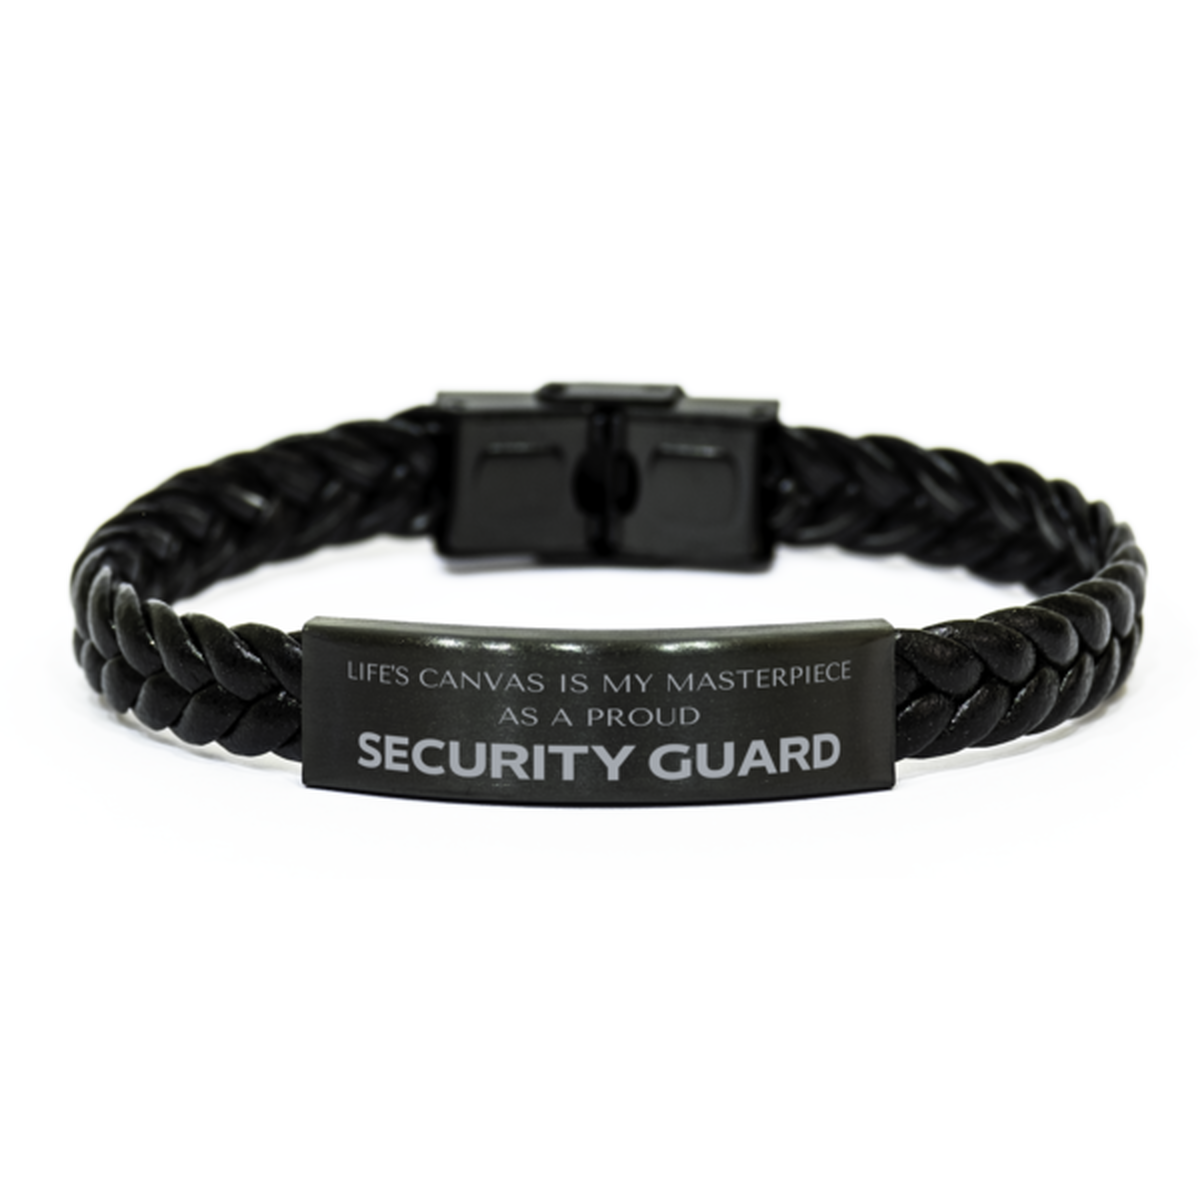 Proud Security Guard Gifts, Life's canvas is my masterpiece, Epic Birthday Christmas Unique Braided Leather Bracelet For Security Guard, Coworkers, Men, Women, Friends